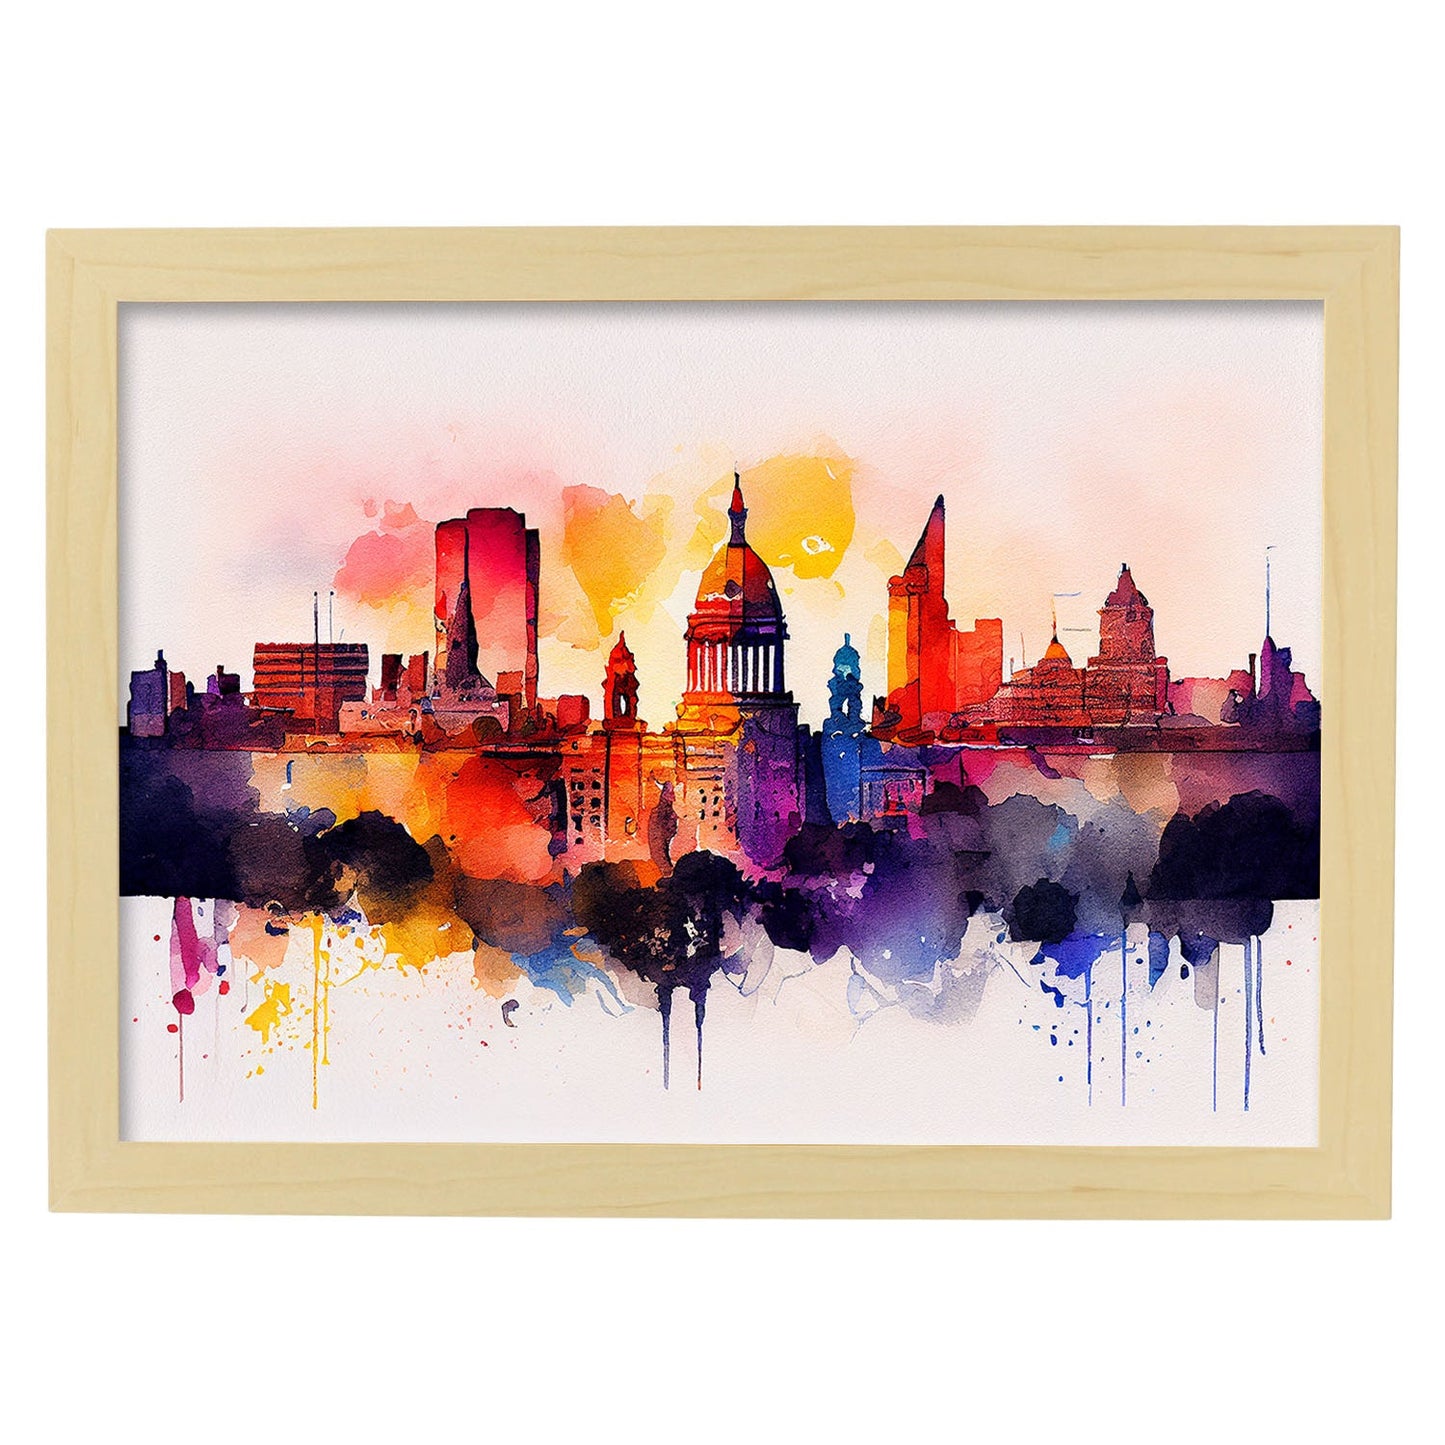 Nacnic watercolor of a skyline of the city of Buenos Aires_3. Aesthetic Wall Art Prints for Bedroom or Living Room Design.-Artwork-Nacnic-A4-Marco Madera Clara-Nacnic Estudio SL